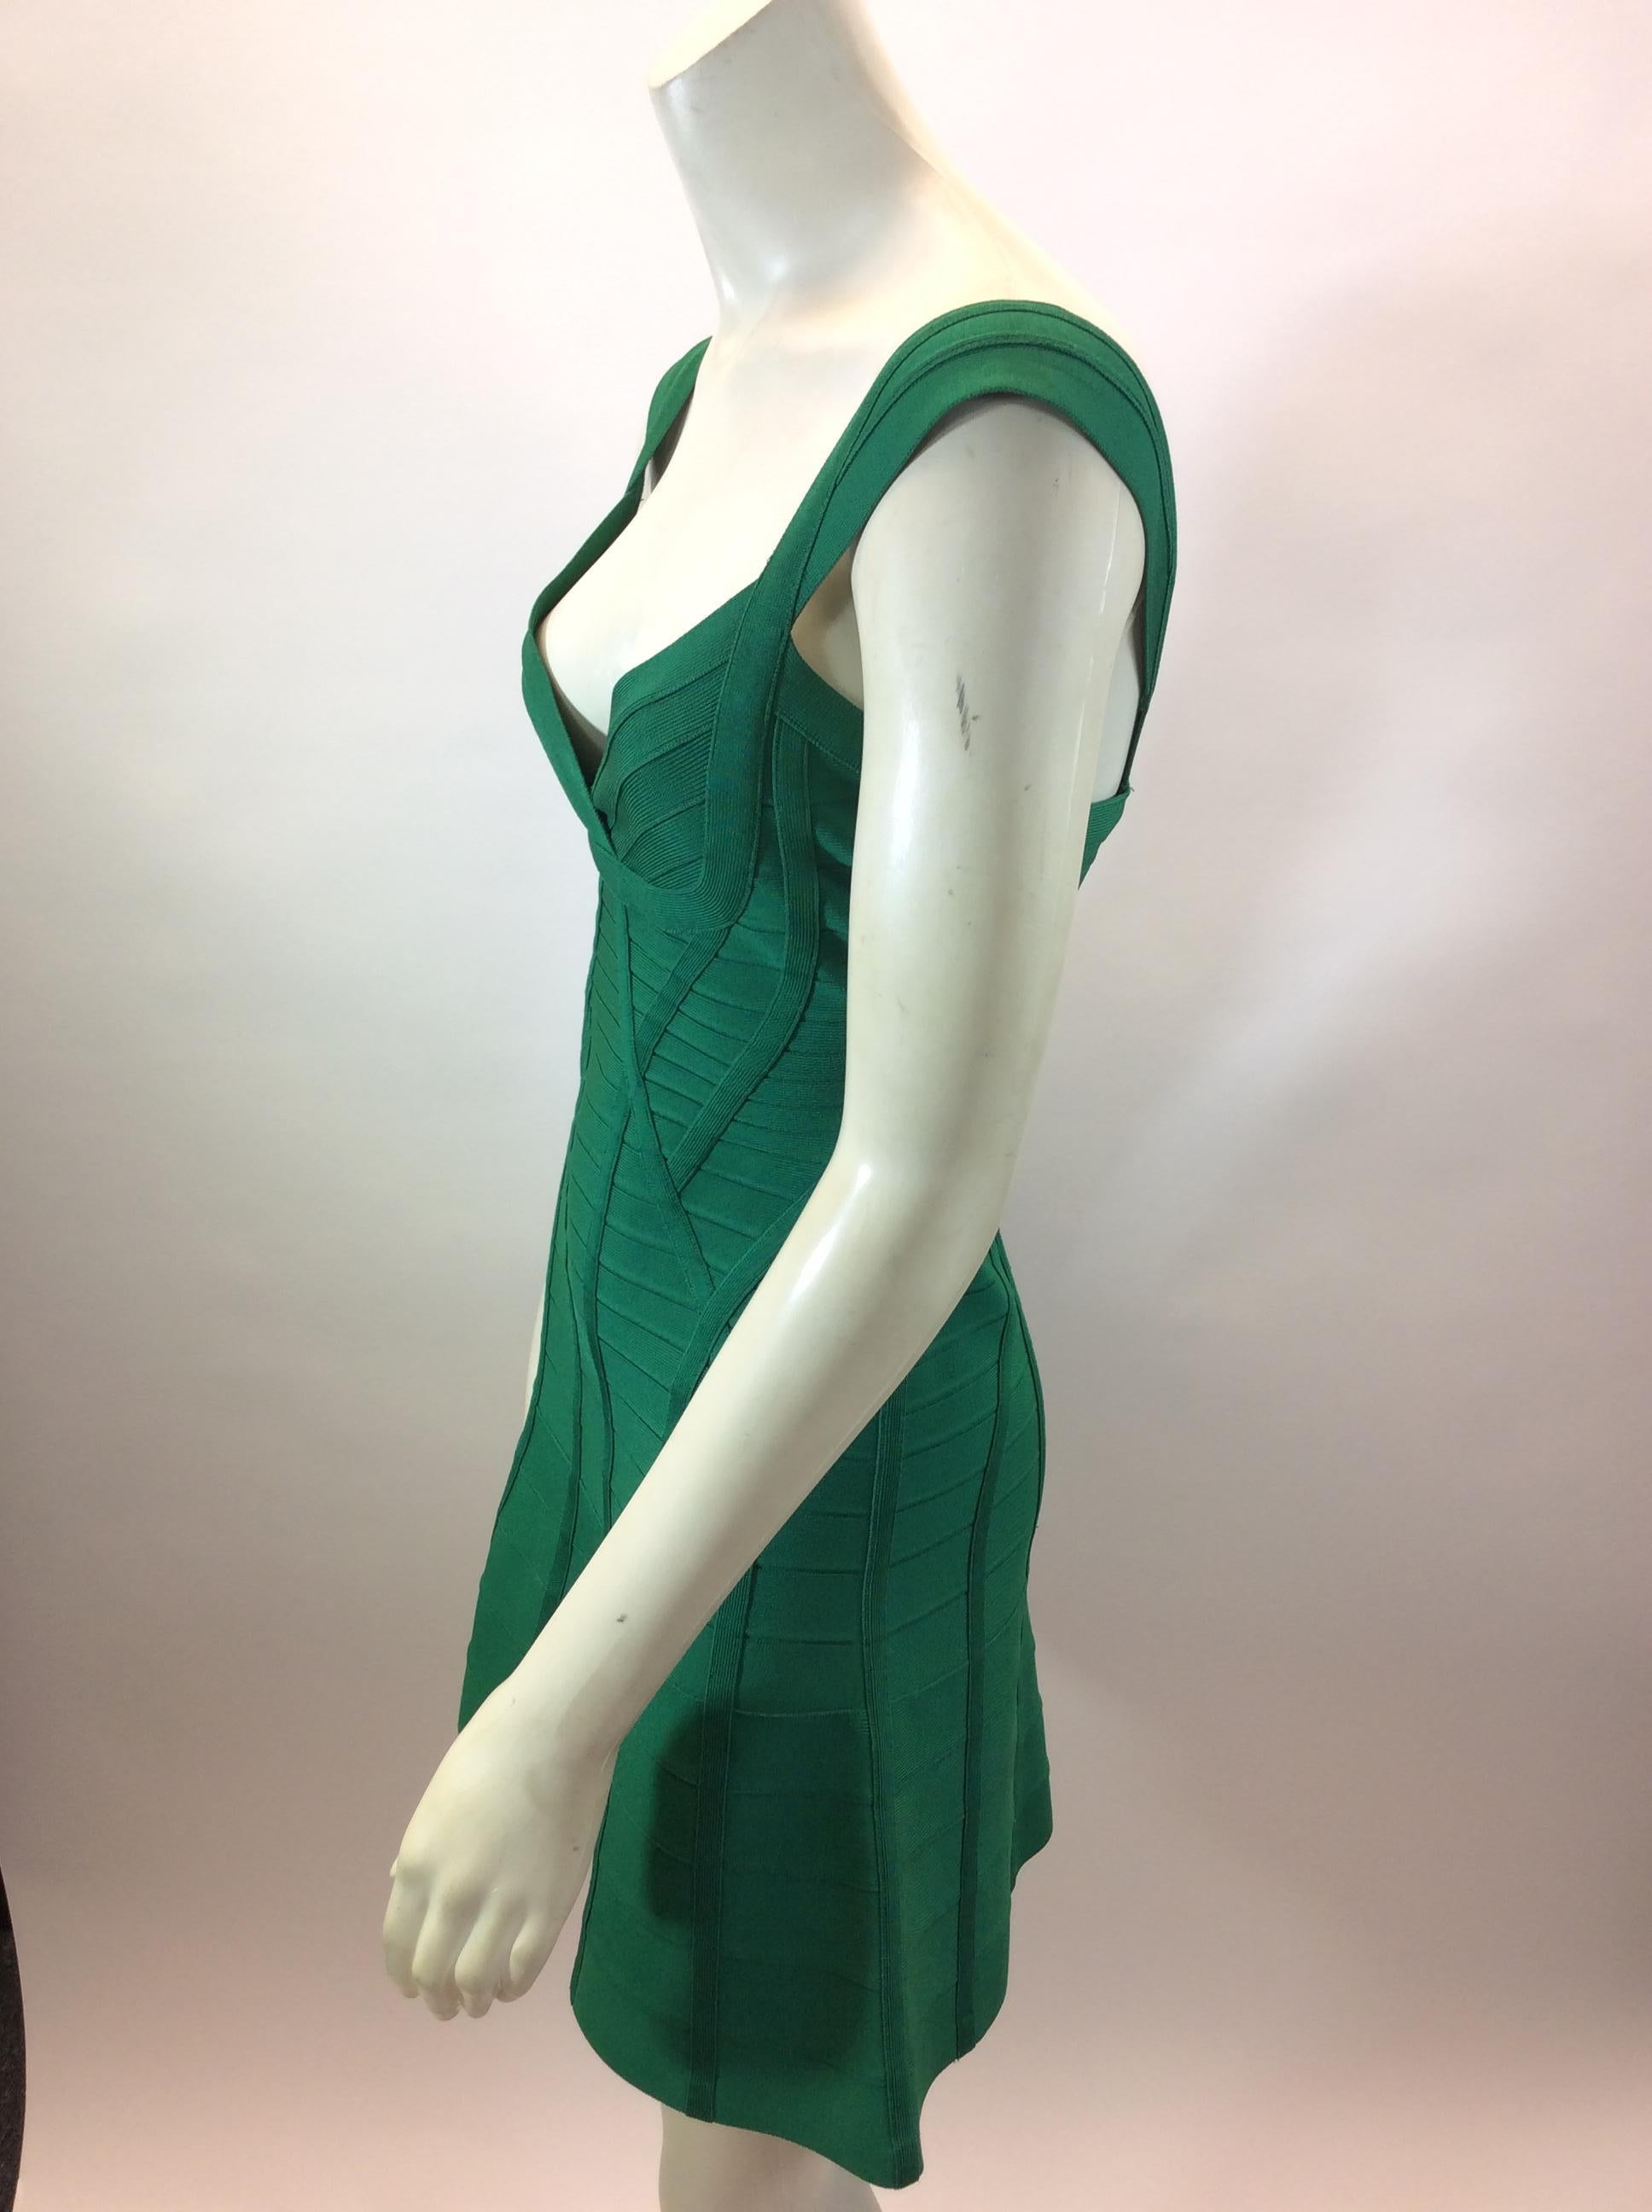 Herve Leger Green Bandage Dress
$399
Made in China
90% Rayon, 9% Nylon, 1% Spandex
Size small
Length 31